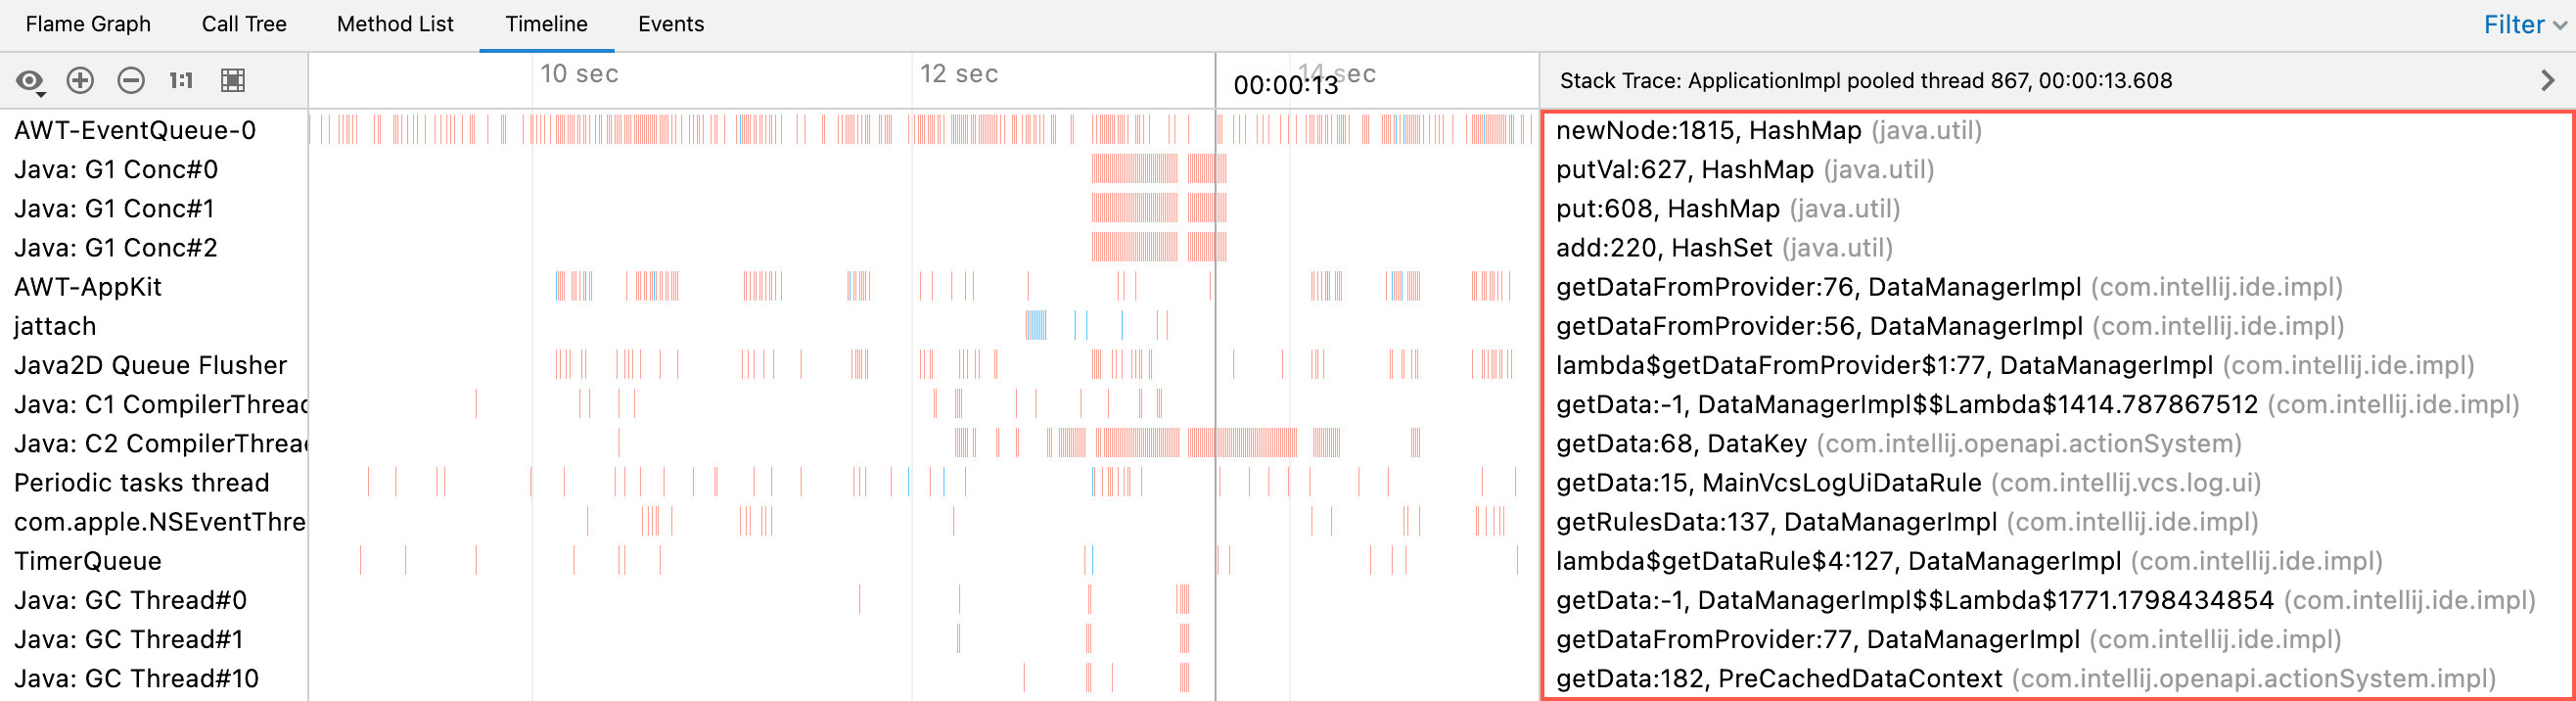 A panel opens showing the stack trace for the selected instant